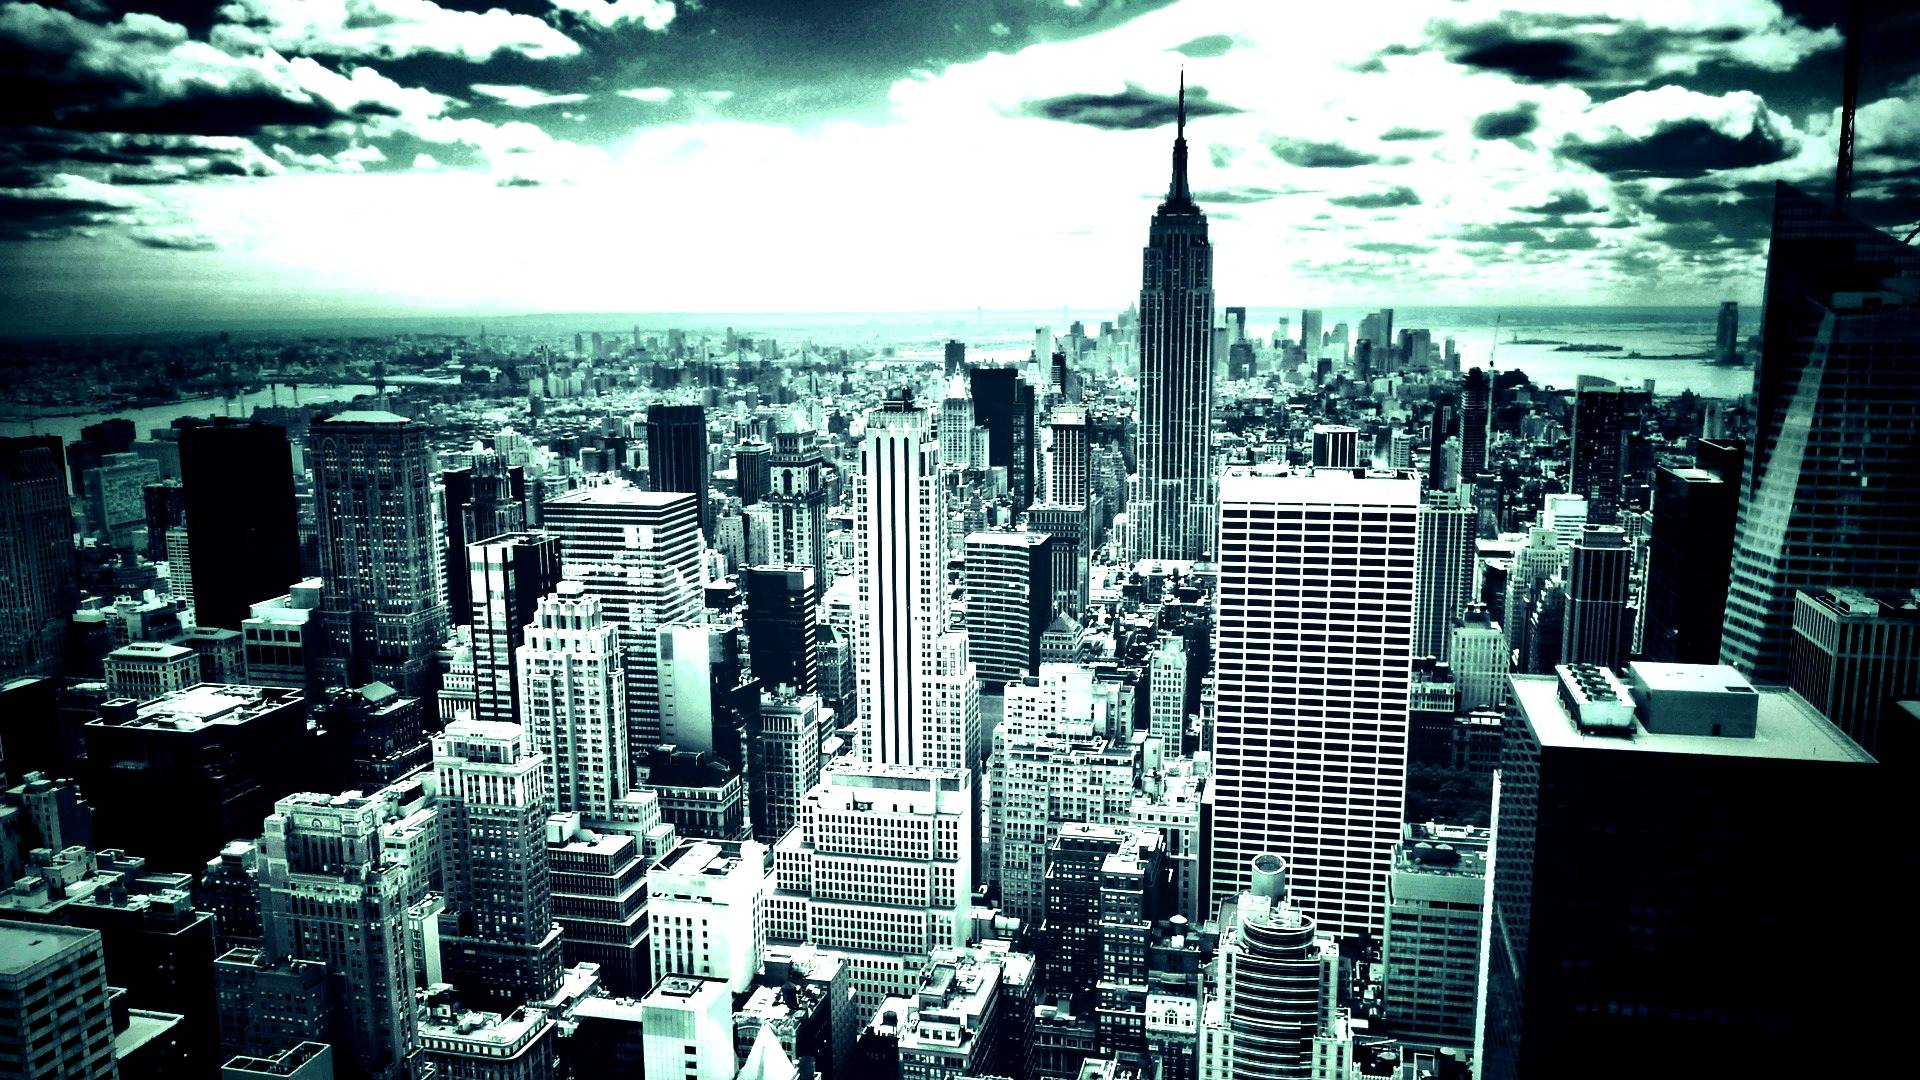 Empire State Building Wallpaper 30769 1920x1080 px